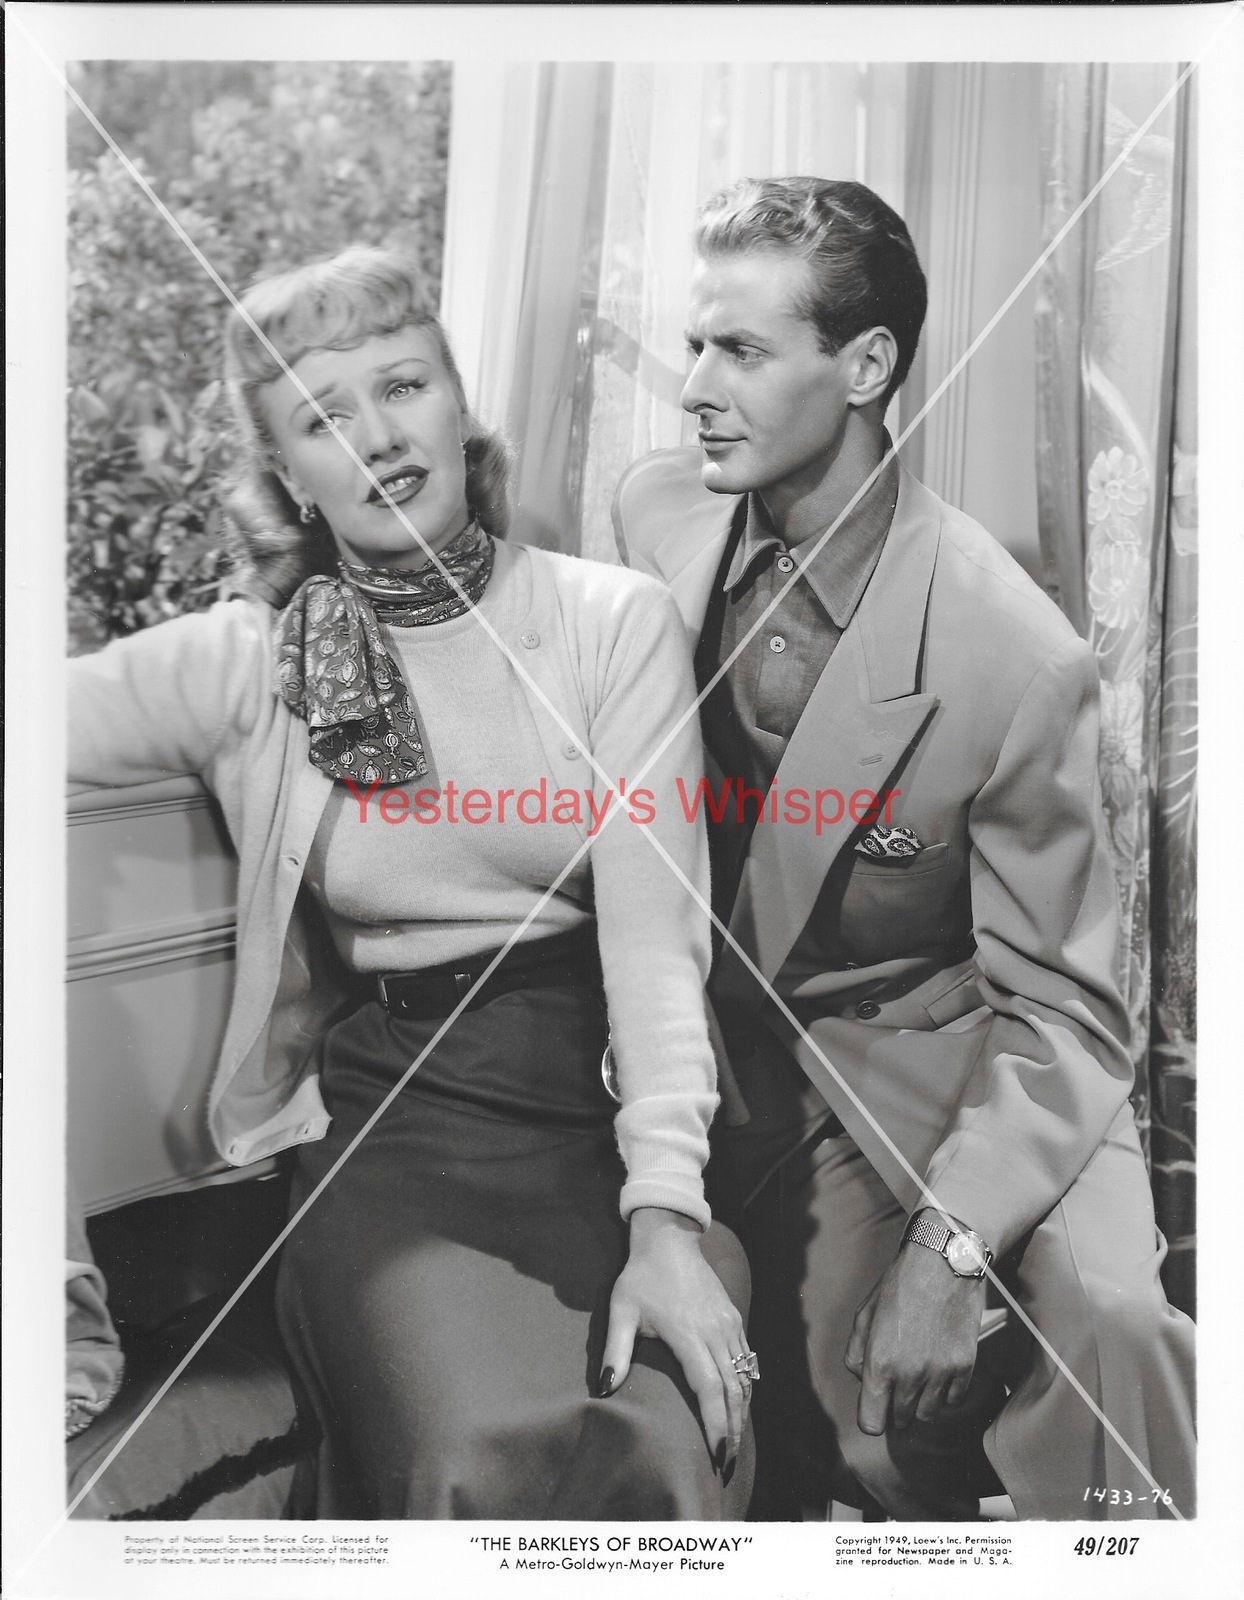 Jacques Francois Ginger Rogers Tight Sweater Original Barkleys of Broadway Photo - $19.99